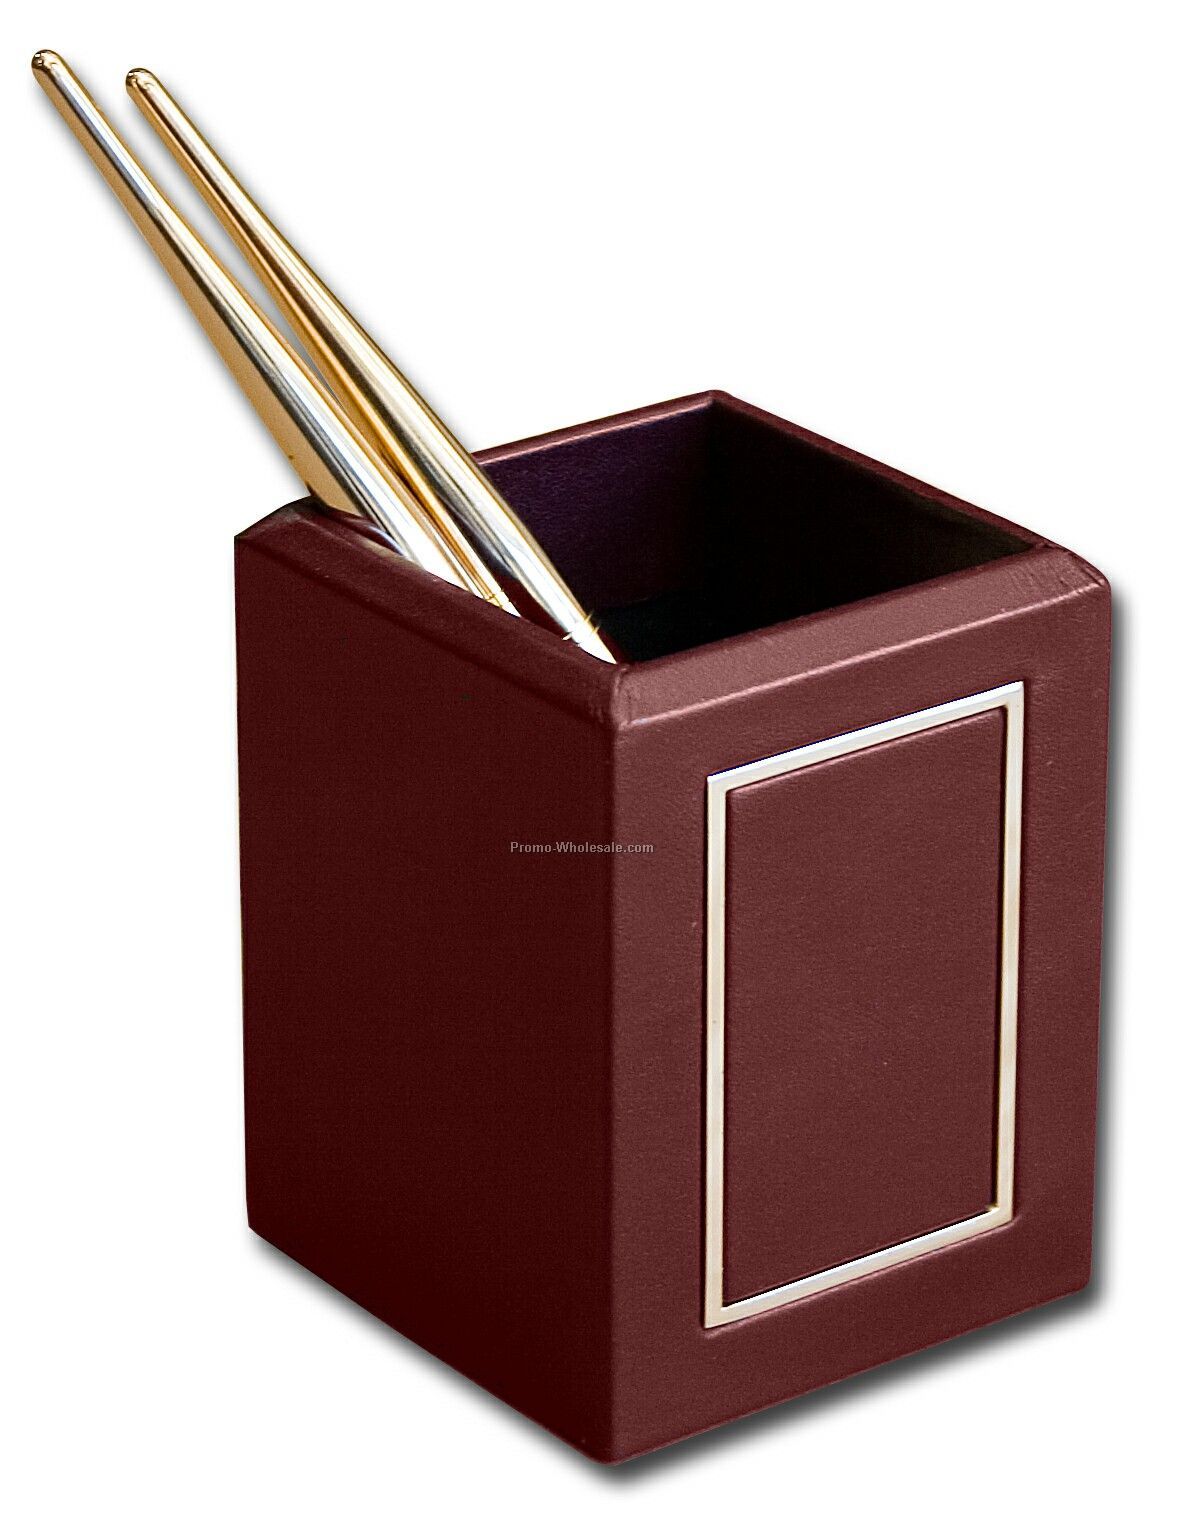 24kt Gold Plated Leather Pencil Cup Holder - Burgundy